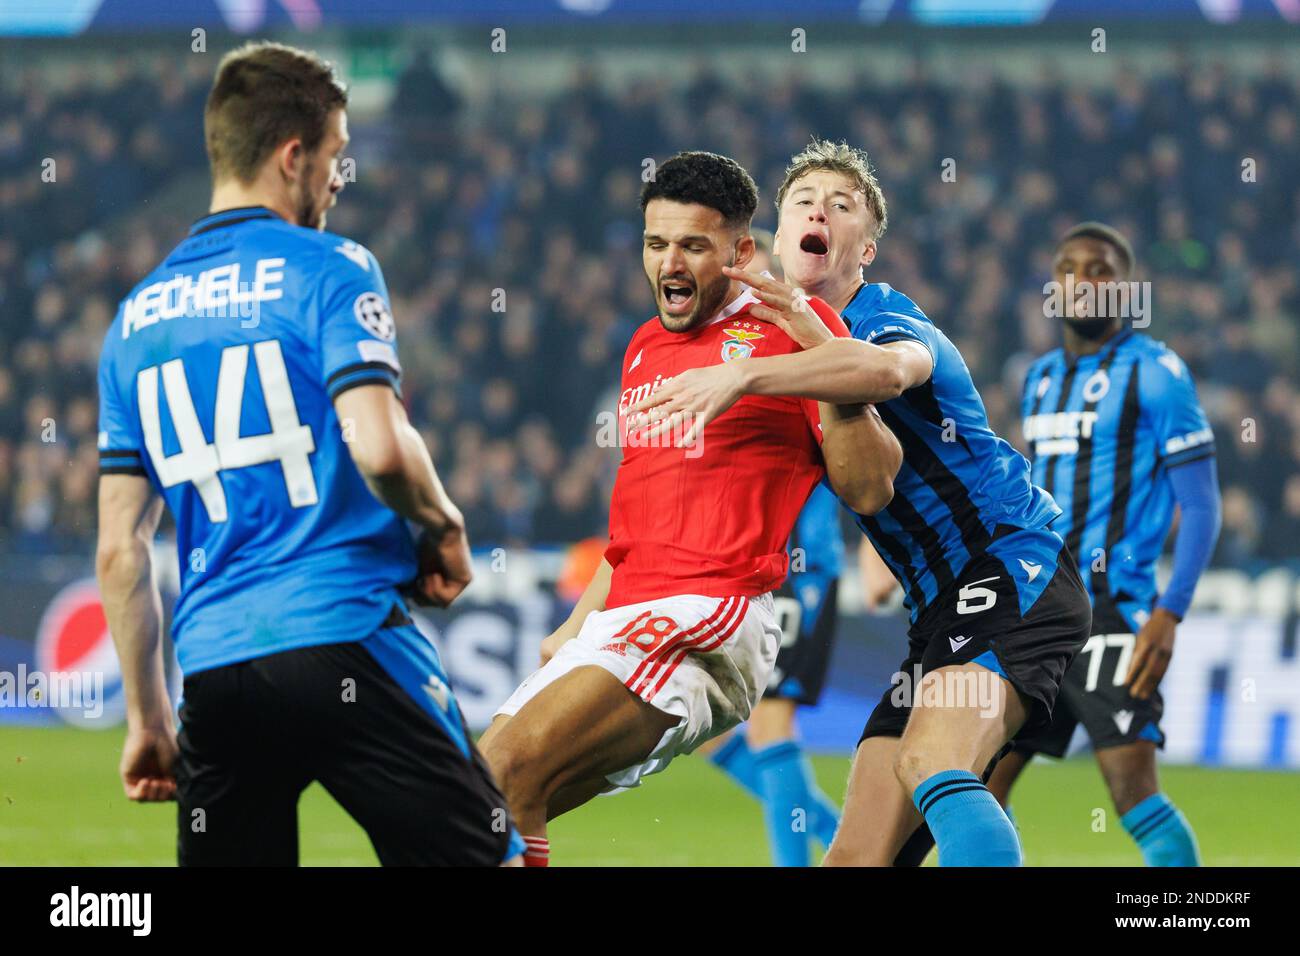 Benfica's Rodrigo Pinho and Club's Jack Hendry fight for the ball during a soccer game between Belgian Club Brugge KV and Portuguese Sport Lisboa e Benfica, Wednesday 15 February 2023 in Brugge, the first leg of the round of 16 of the UEFA Champions League competition. BELGA PHOTO KURT DESPLENTER Stock Photo